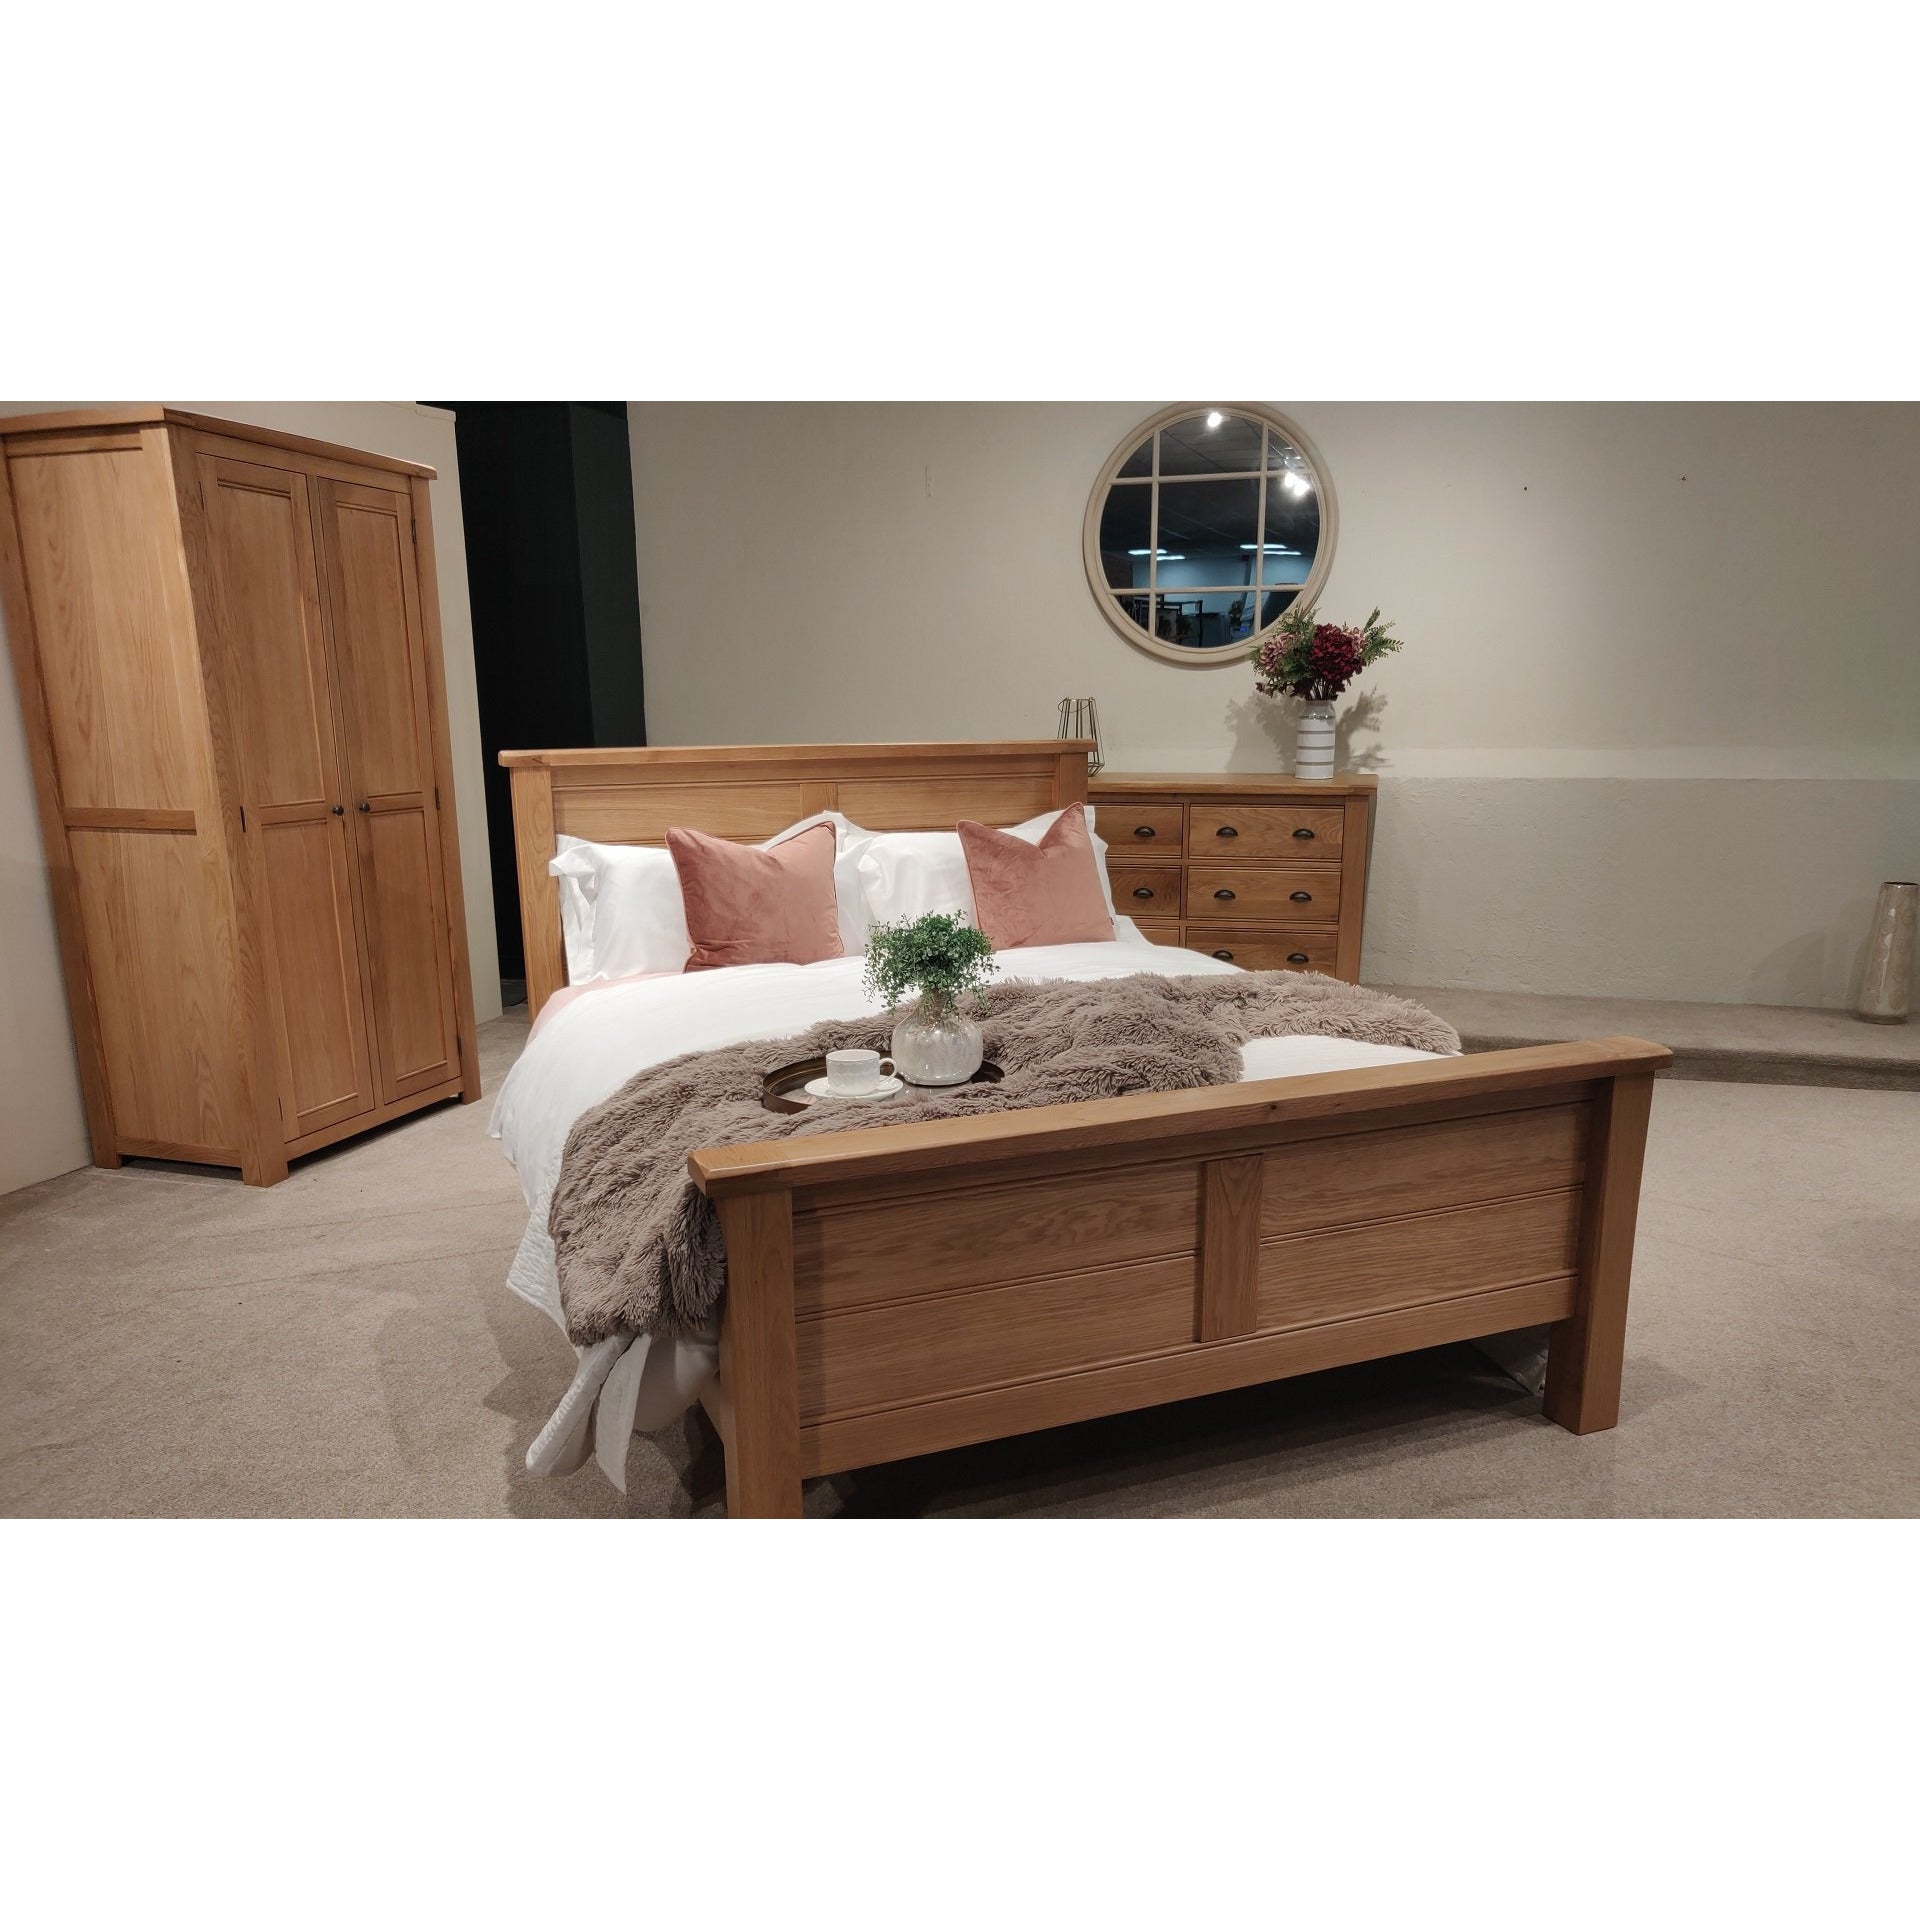 Blake 4ft6 Double Bed Frame